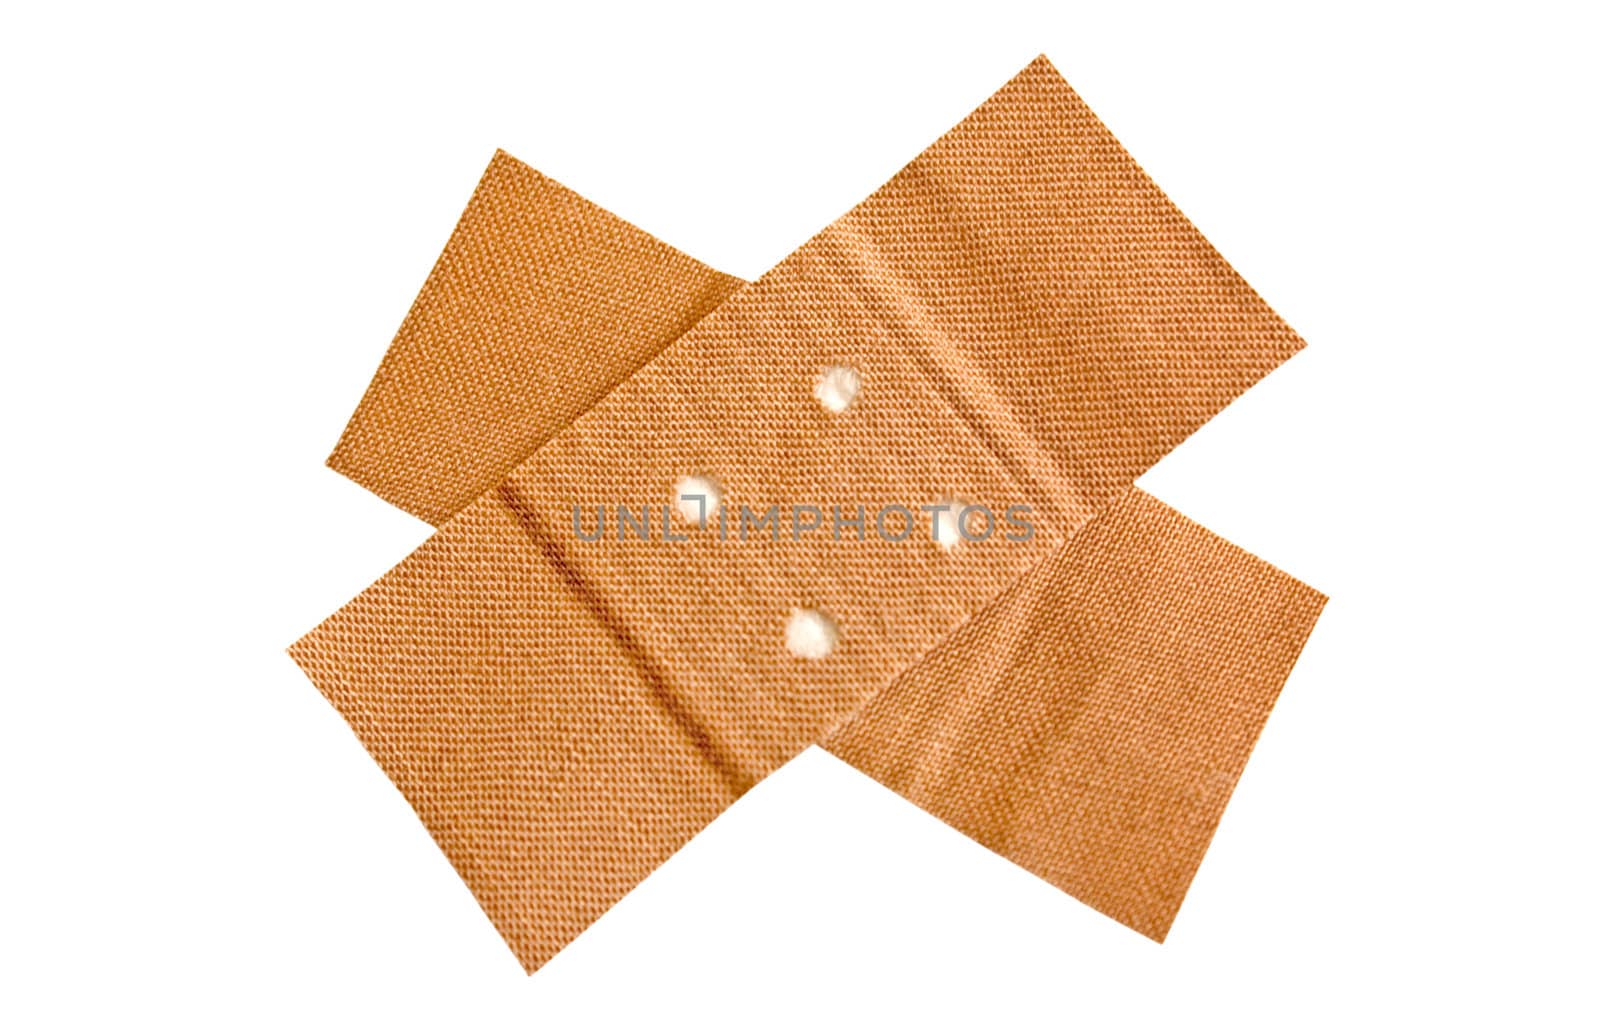 Adhesive Bandage with Clipping Path by winterling